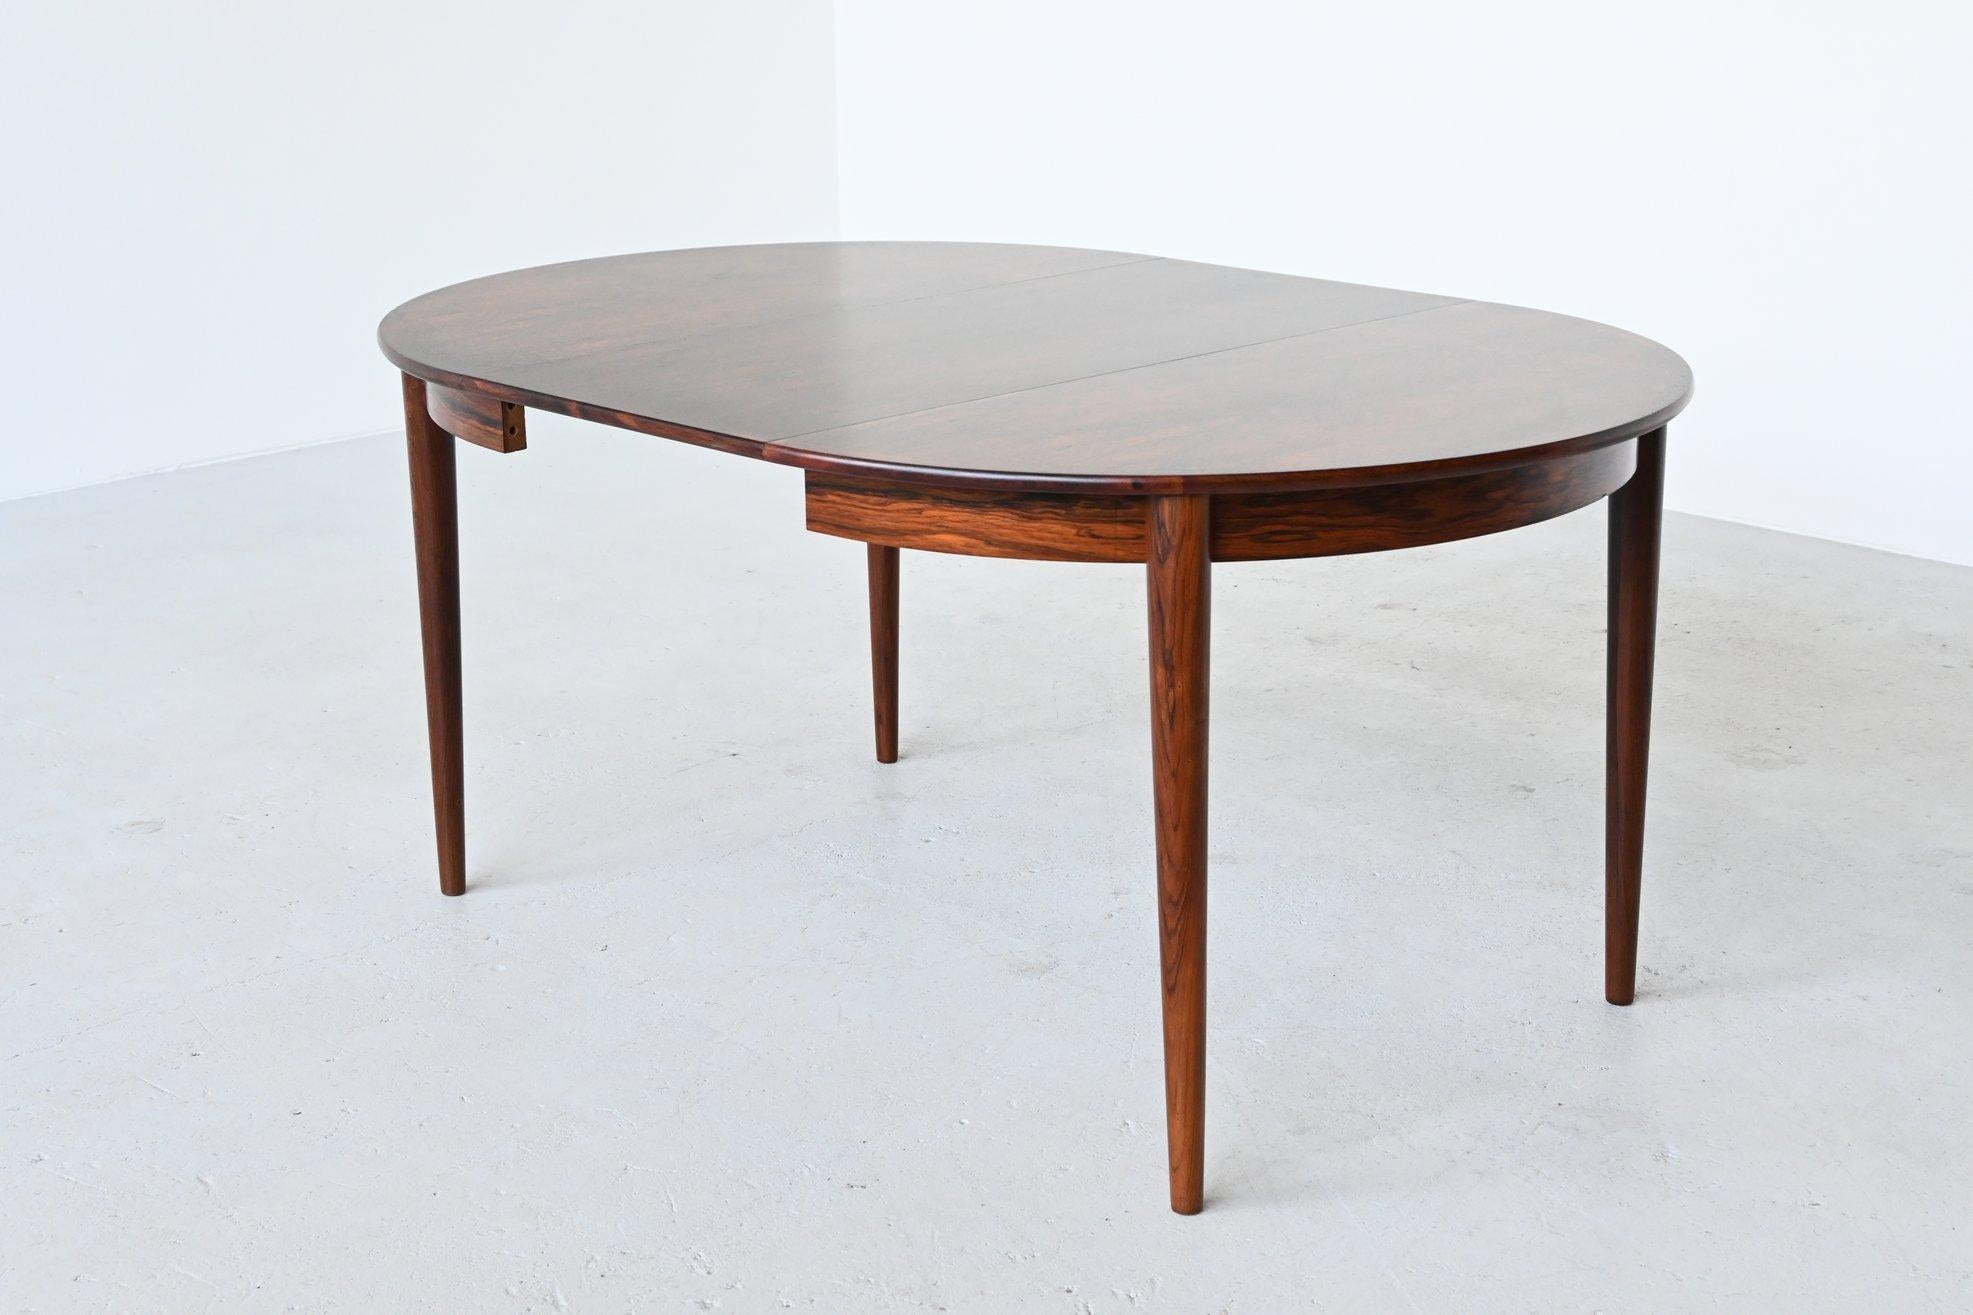 Nicely crafted rosewood extendable dining table manufactured by MSE Mobler in Torring, Denmark 1960. This table is made of rosewood and has an amazing grain to the warm rosewood veneer. It can be extended from 110 cm round to 160 cm oval by pulling